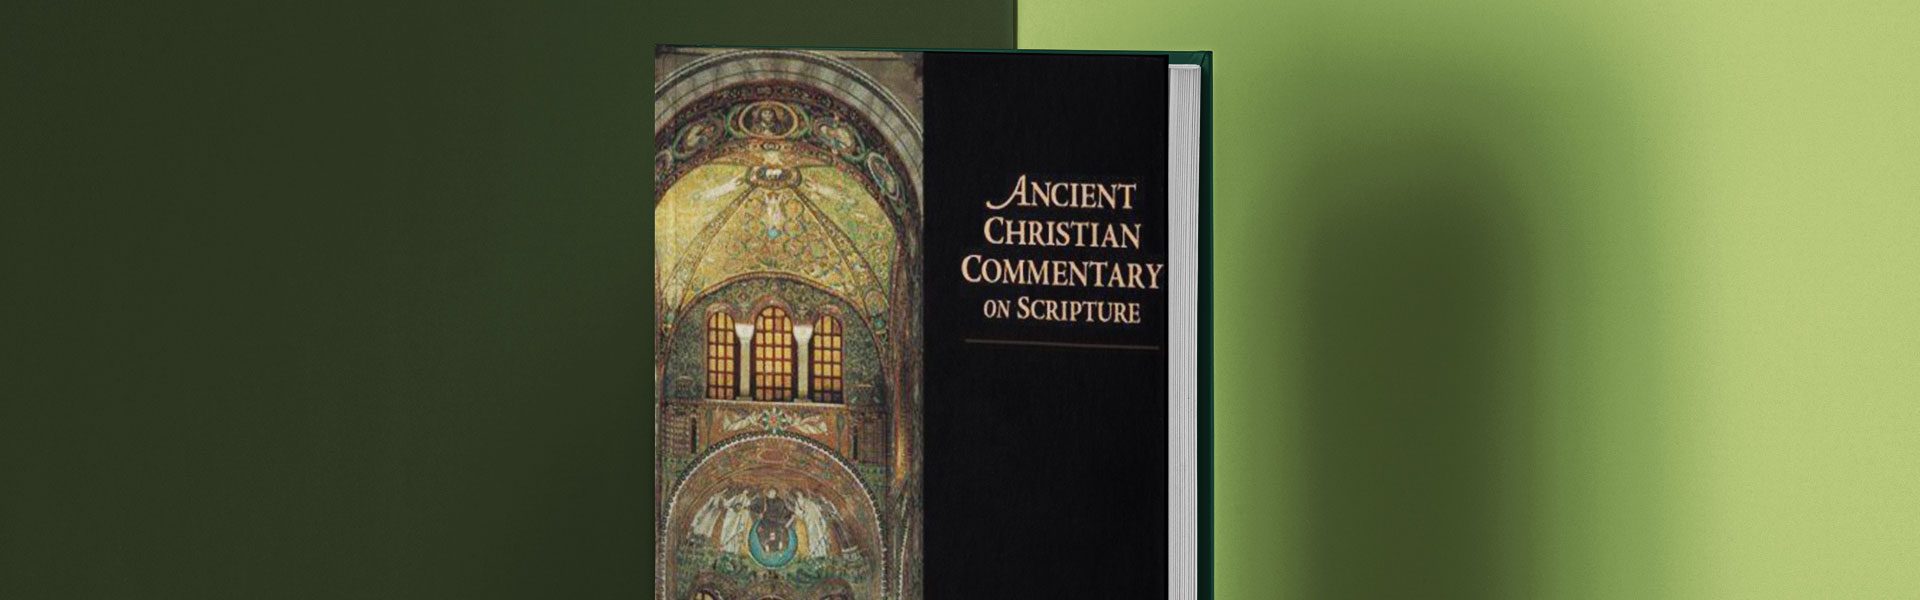 Ancient Christian Commentary on Scripture - used to research Gregory the Great